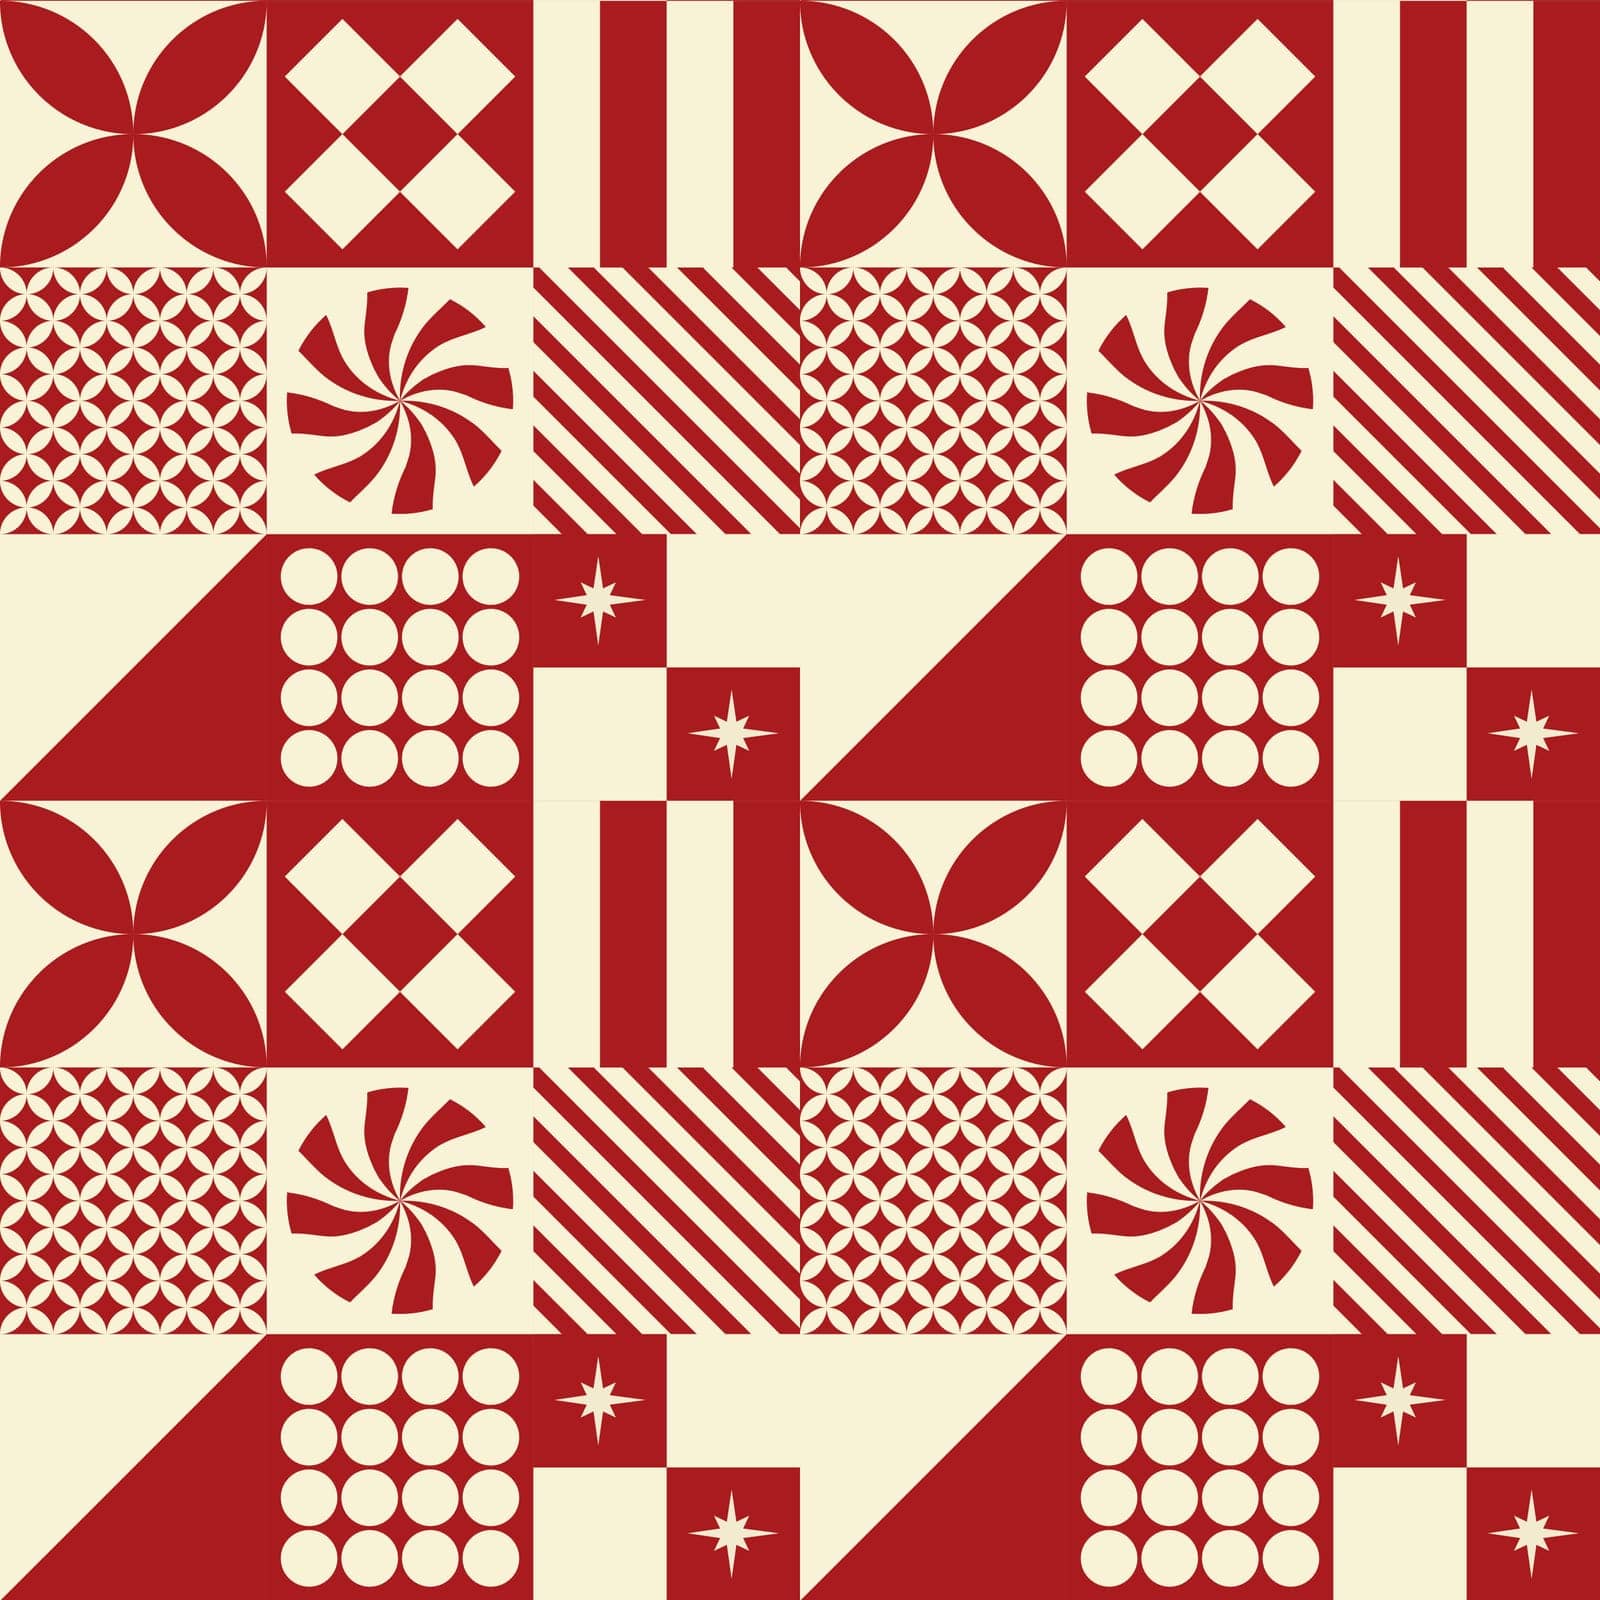 Xmas and new year holiday, decorative abstract geometric shapes and decor. Wrapping for presents, Christmas adornment. Seamless pattern, background print, or wallpaper. Vector in flat styles